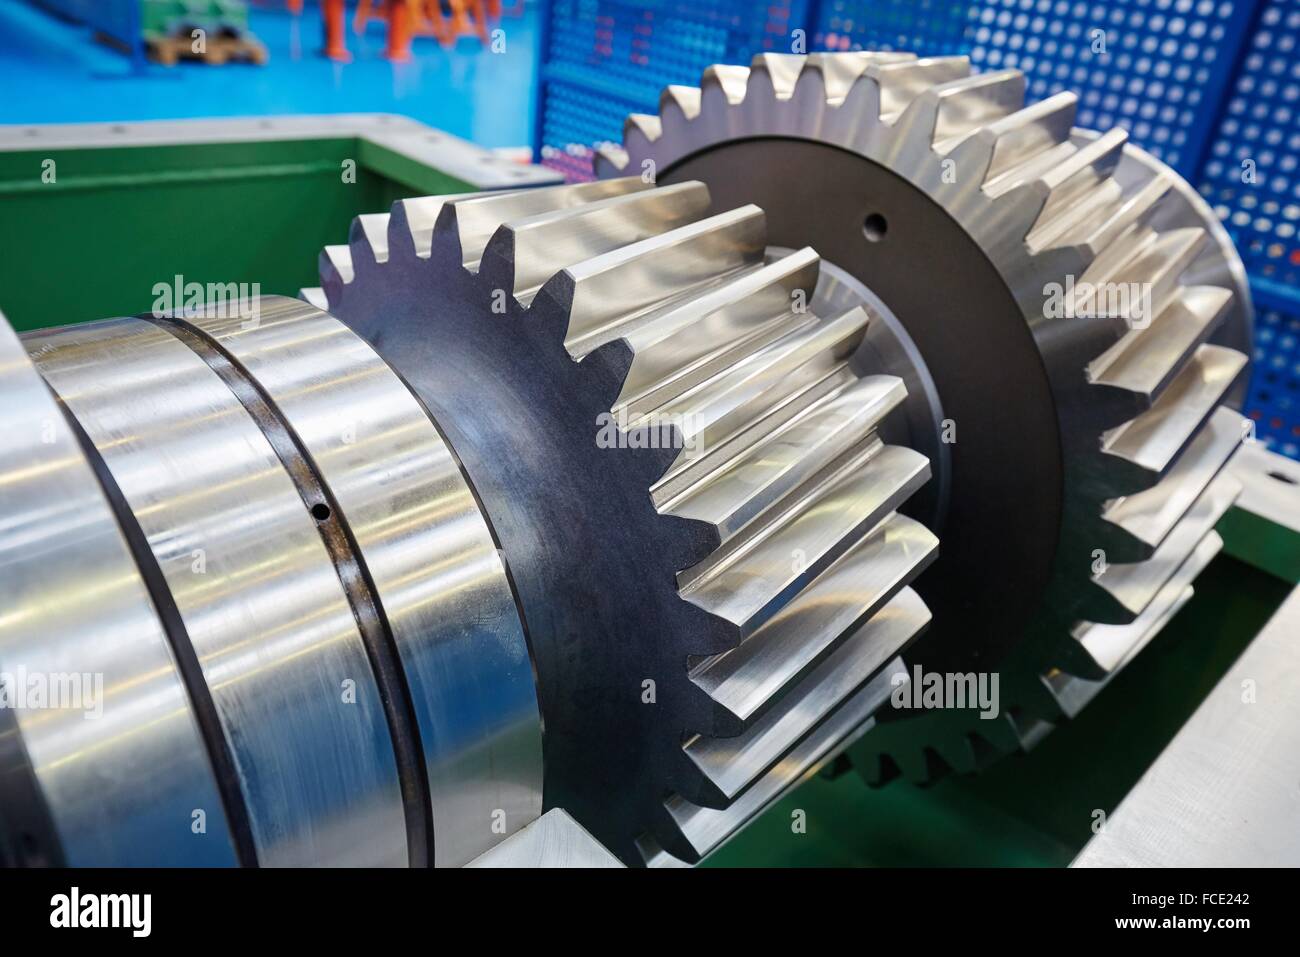 Gearbox. Industry. Gipuzkoa. Basque Country. Spain. Stock Photo